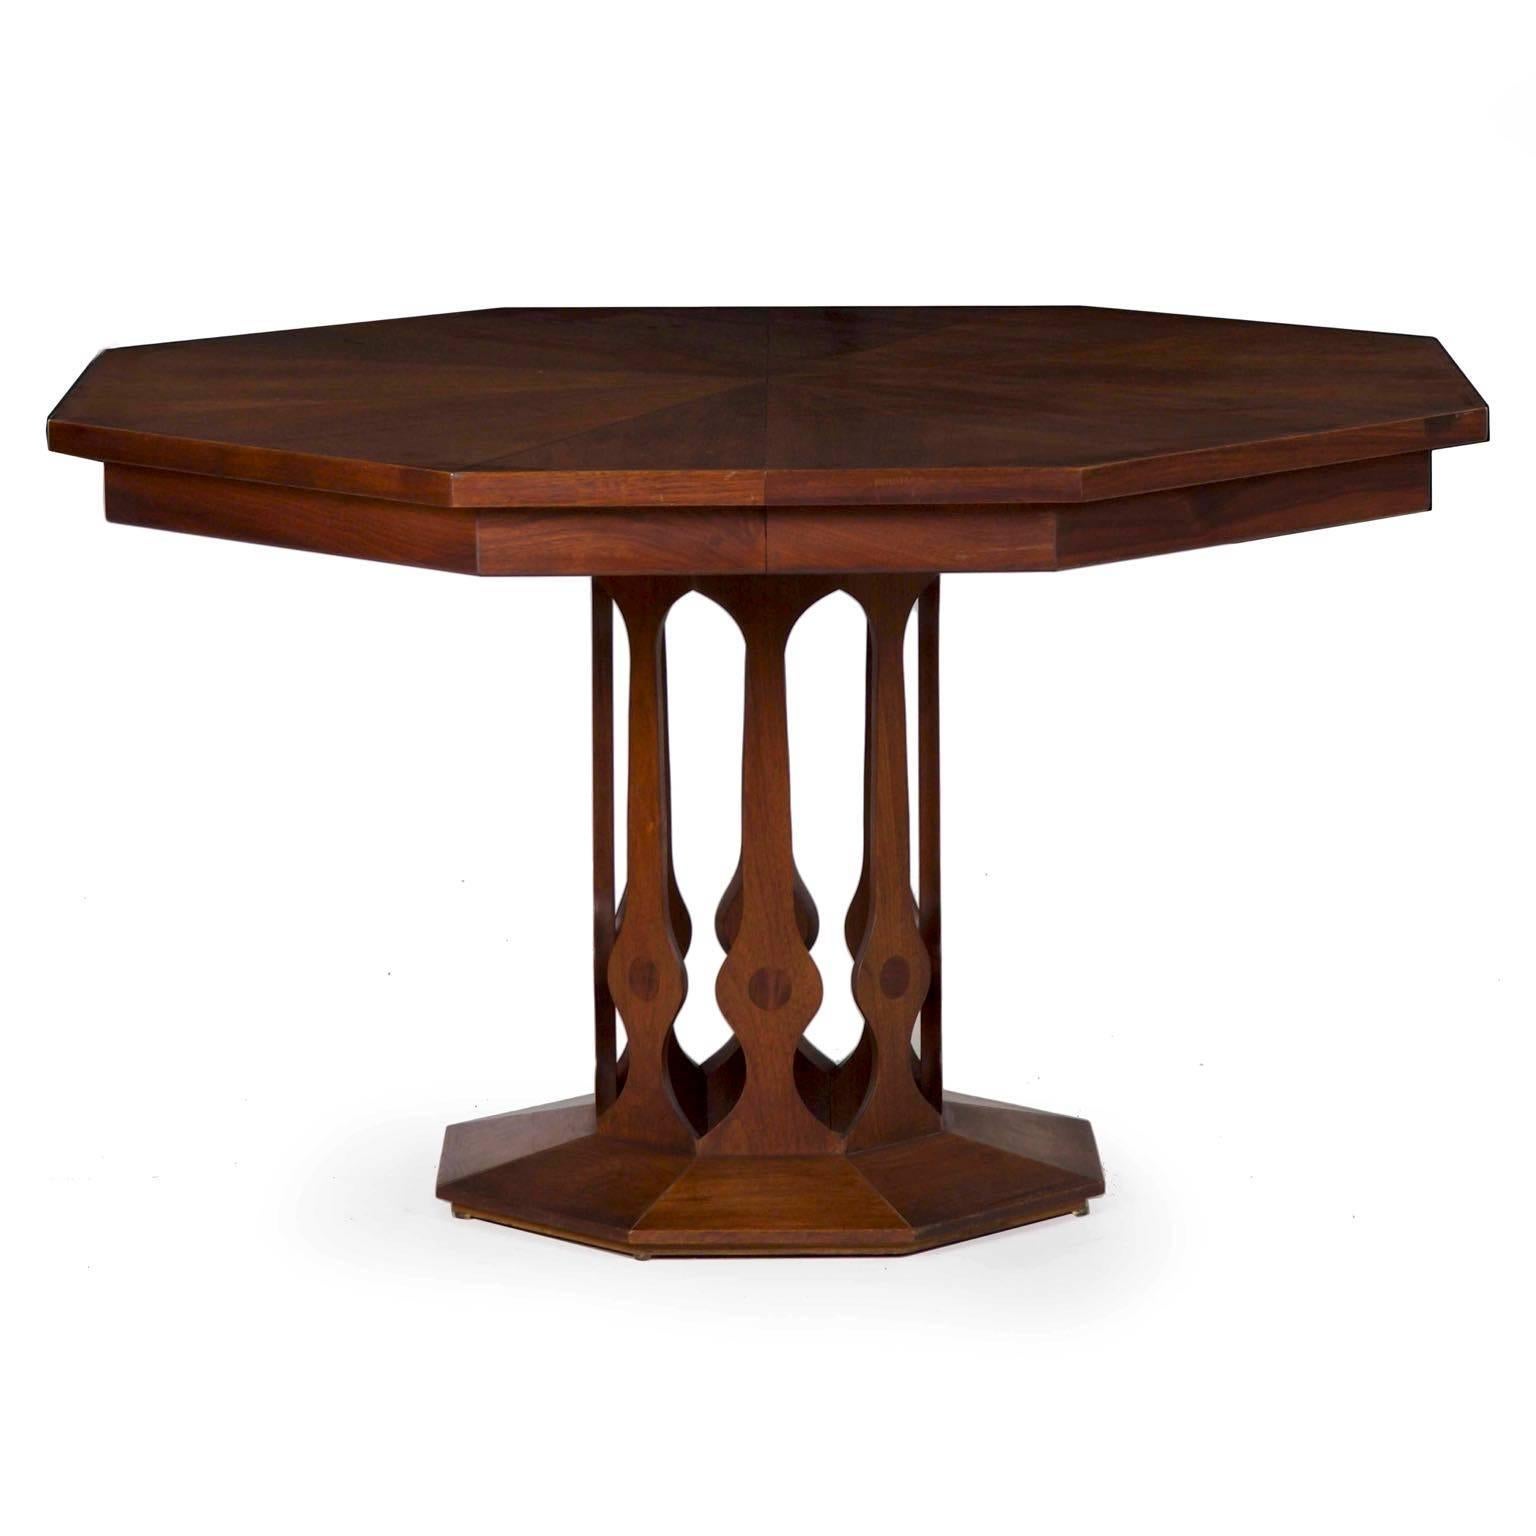 Part of the Intaglio collection designed and manufactured by Foster-McDavid in the 1970s, this exceptional dining table is such a smart design. The materials are top-notch, utilizing walnut veneers in the top, walnut inlays to highlight the top and